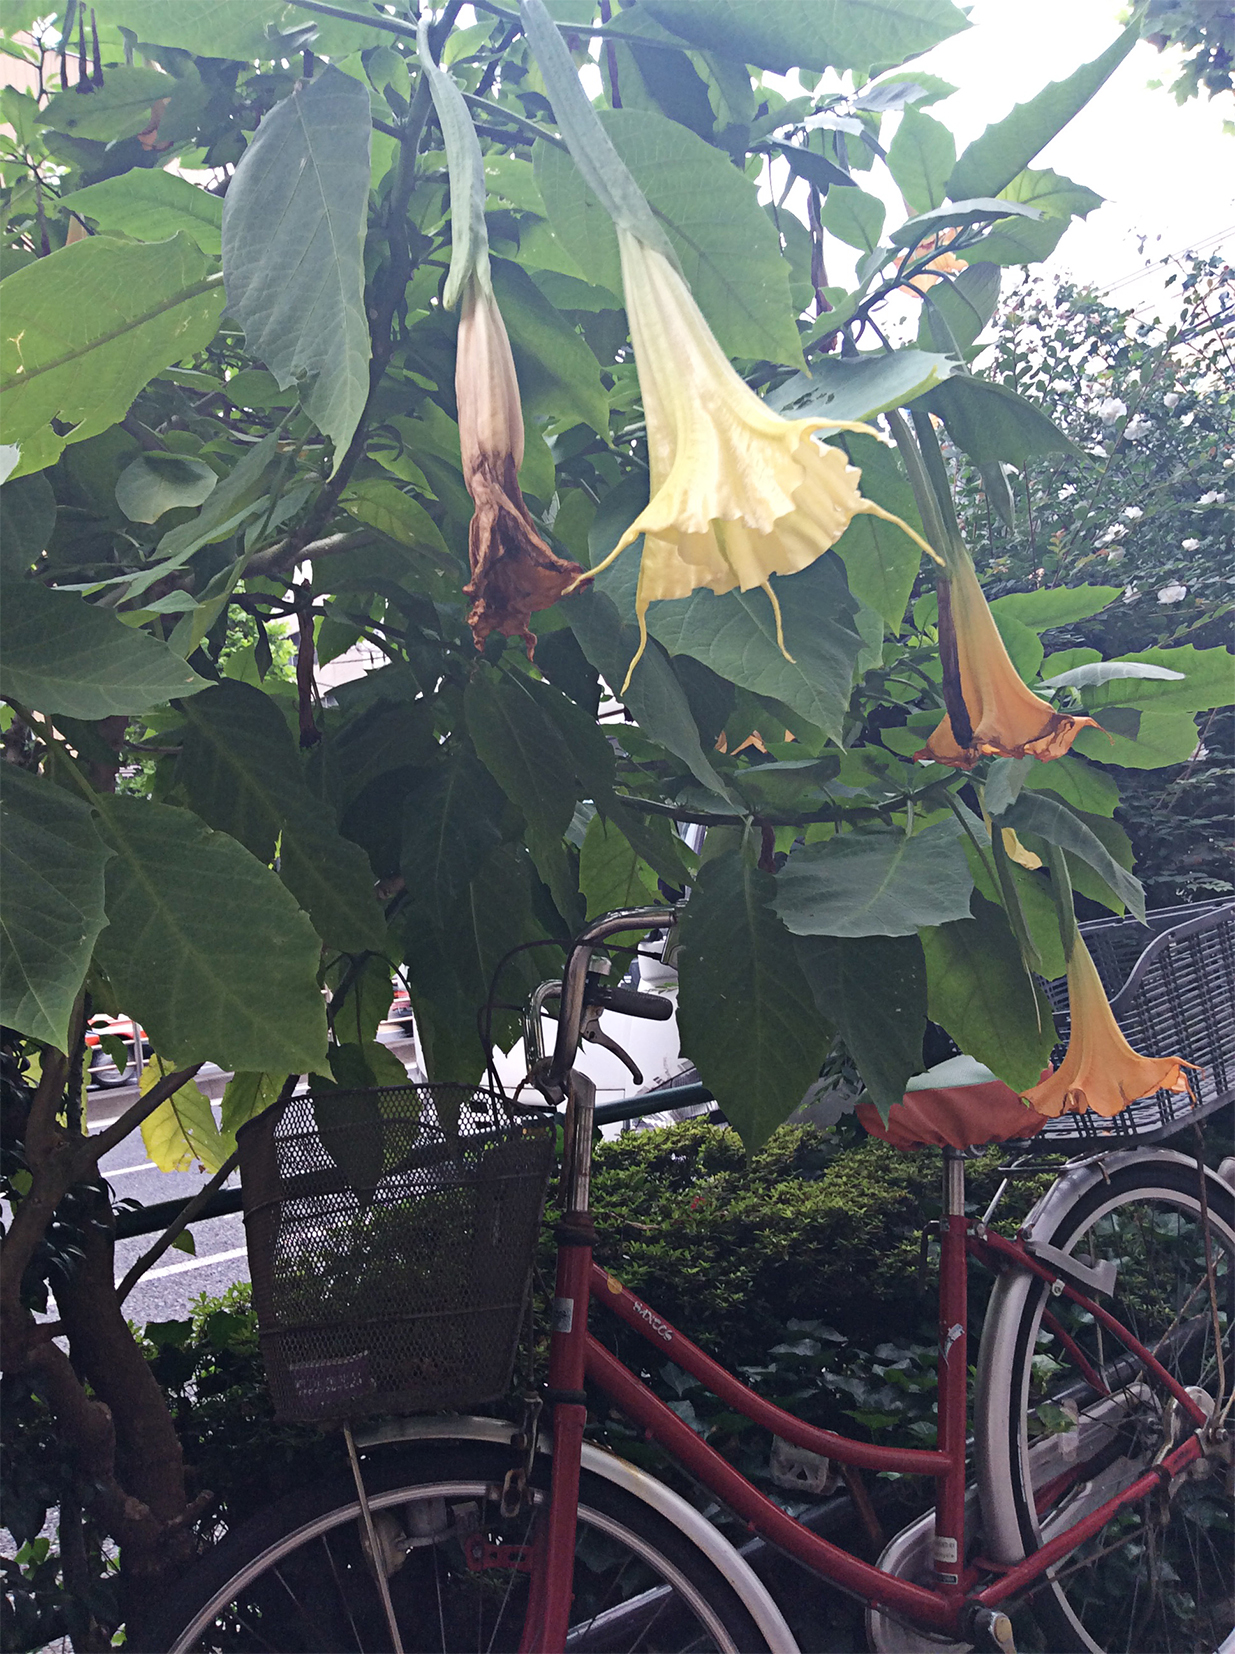 a red bicycle with baskets back and front, is proped up under a Brugmansia - Angels or Devils Trumpet.